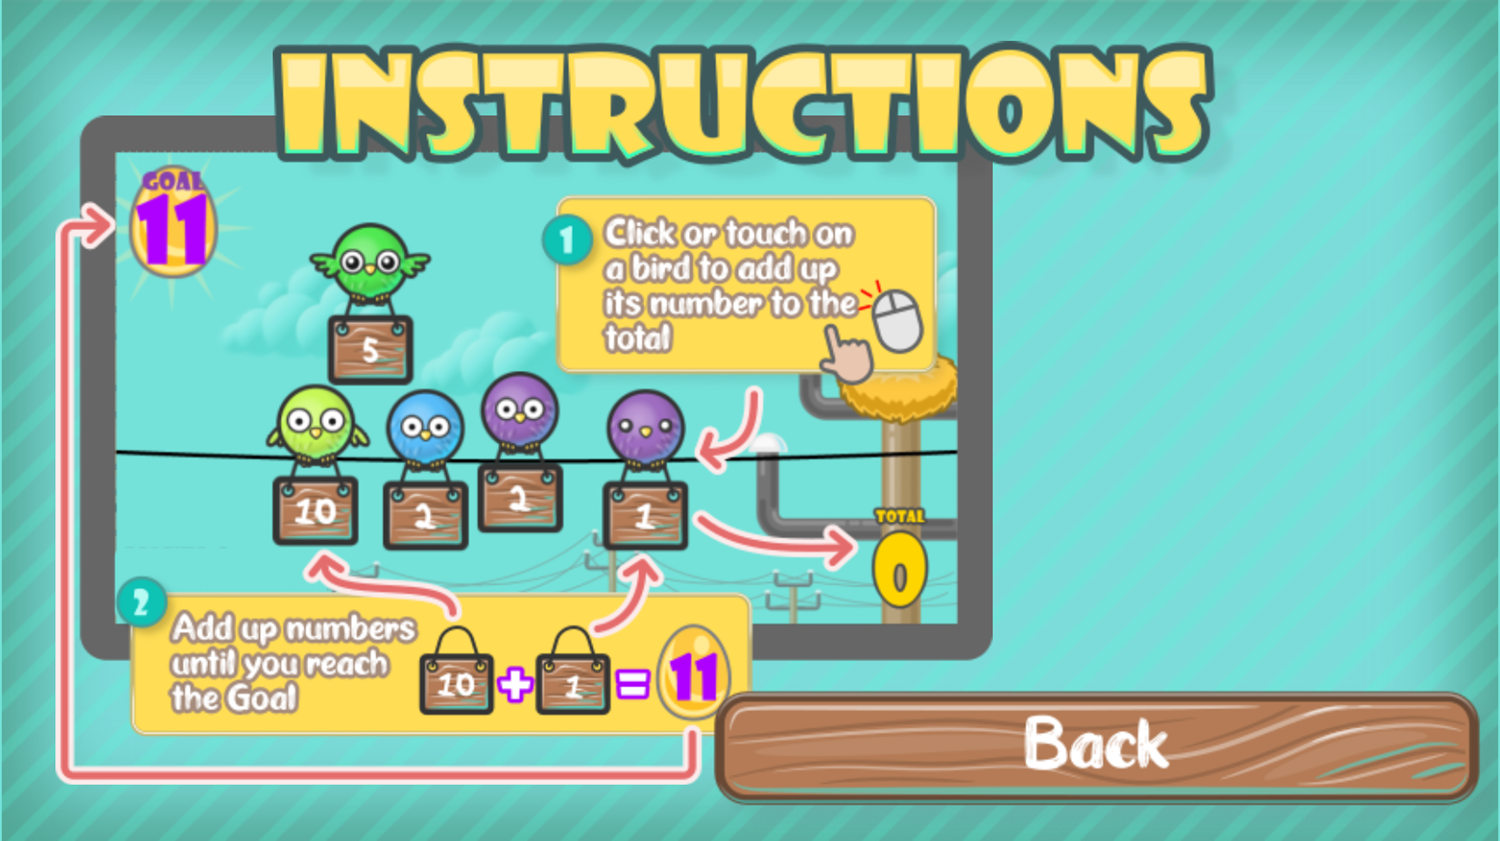 Bird Line Math Addition Game How to Play Instructions Screen Screenshot.